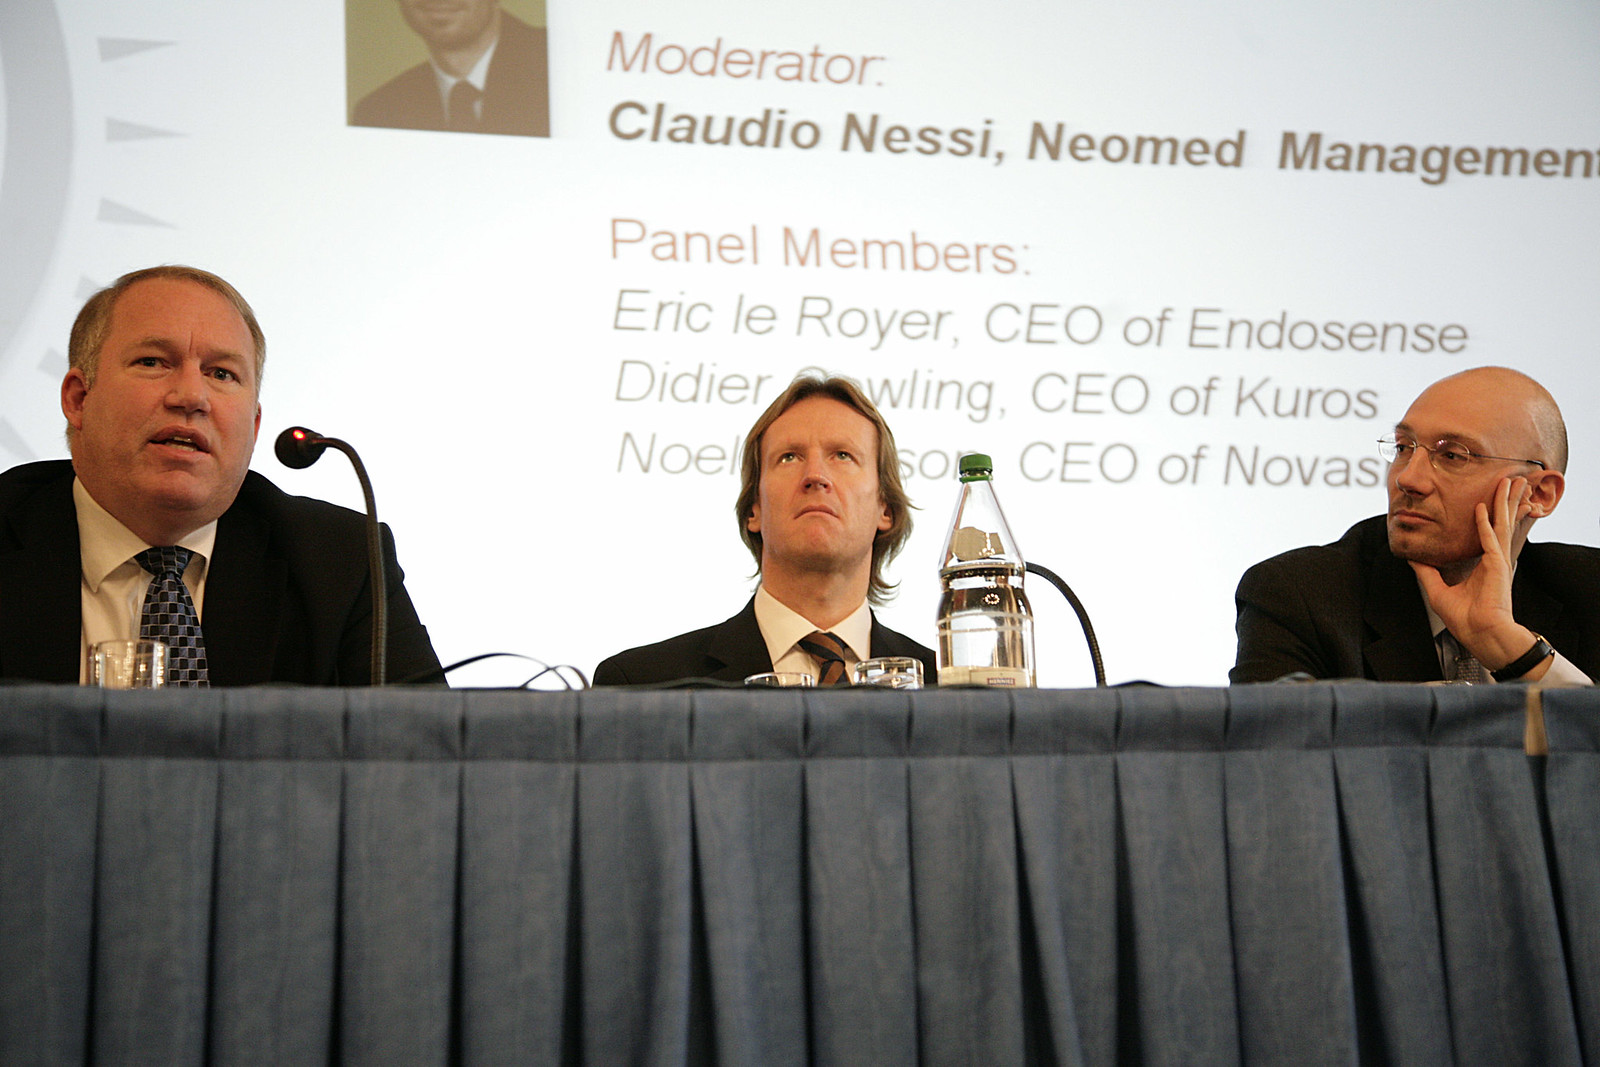 3 Panelists moderated by Claudio Nessi